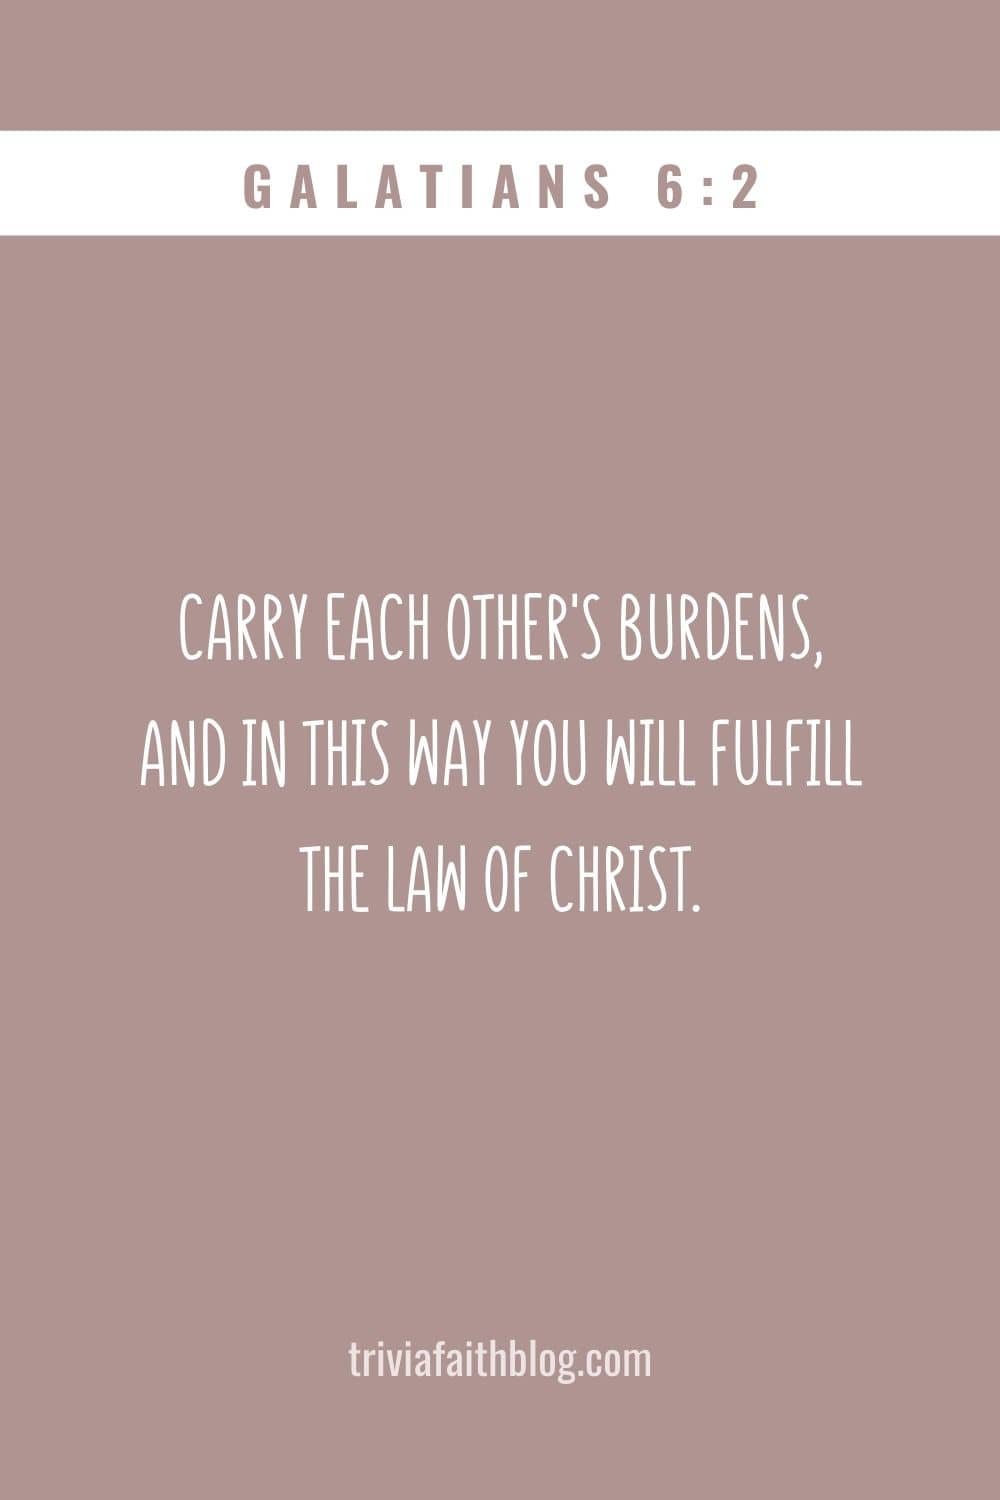 Carry each other's burdens, and in this way you will fulfill the law of Christ